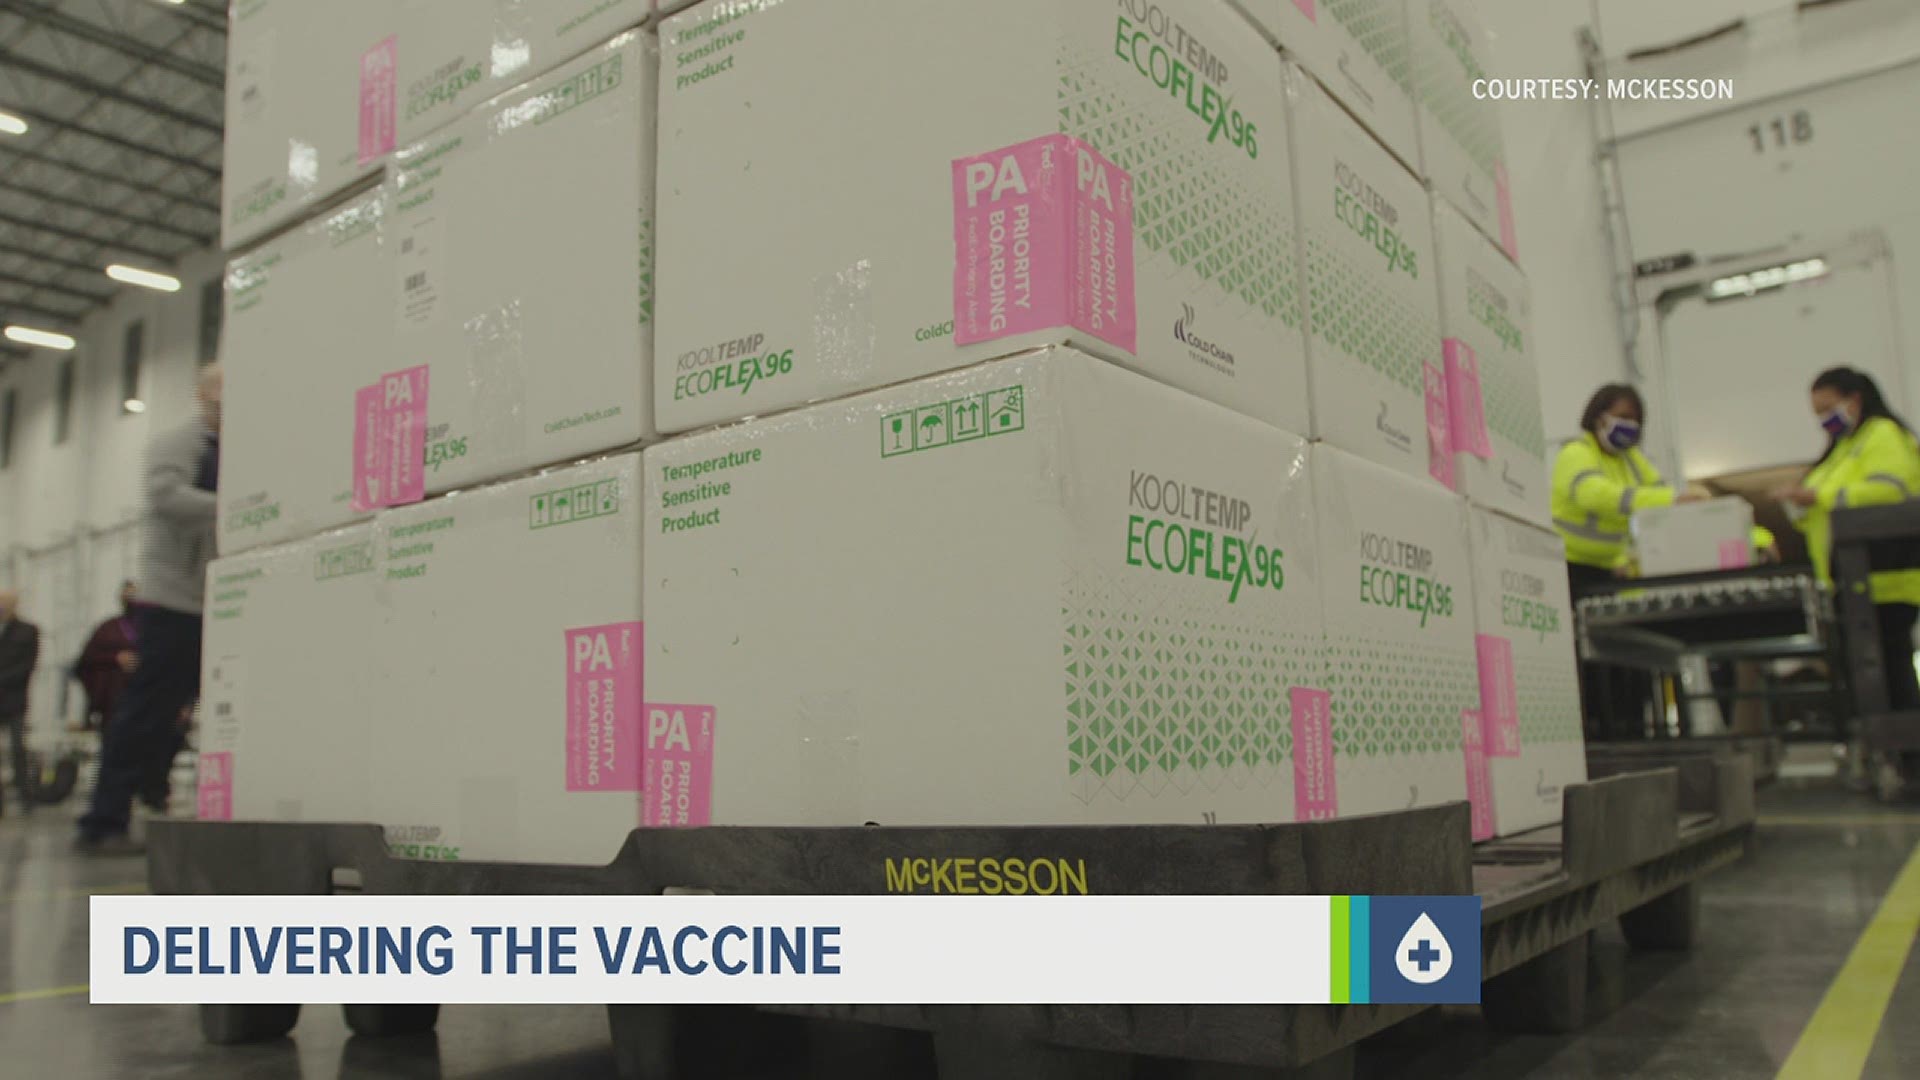 Hear from one Dauphin County native who is helping in the process to deliver COVID-19 vaccines across the nation, including here in Pennsylvania.